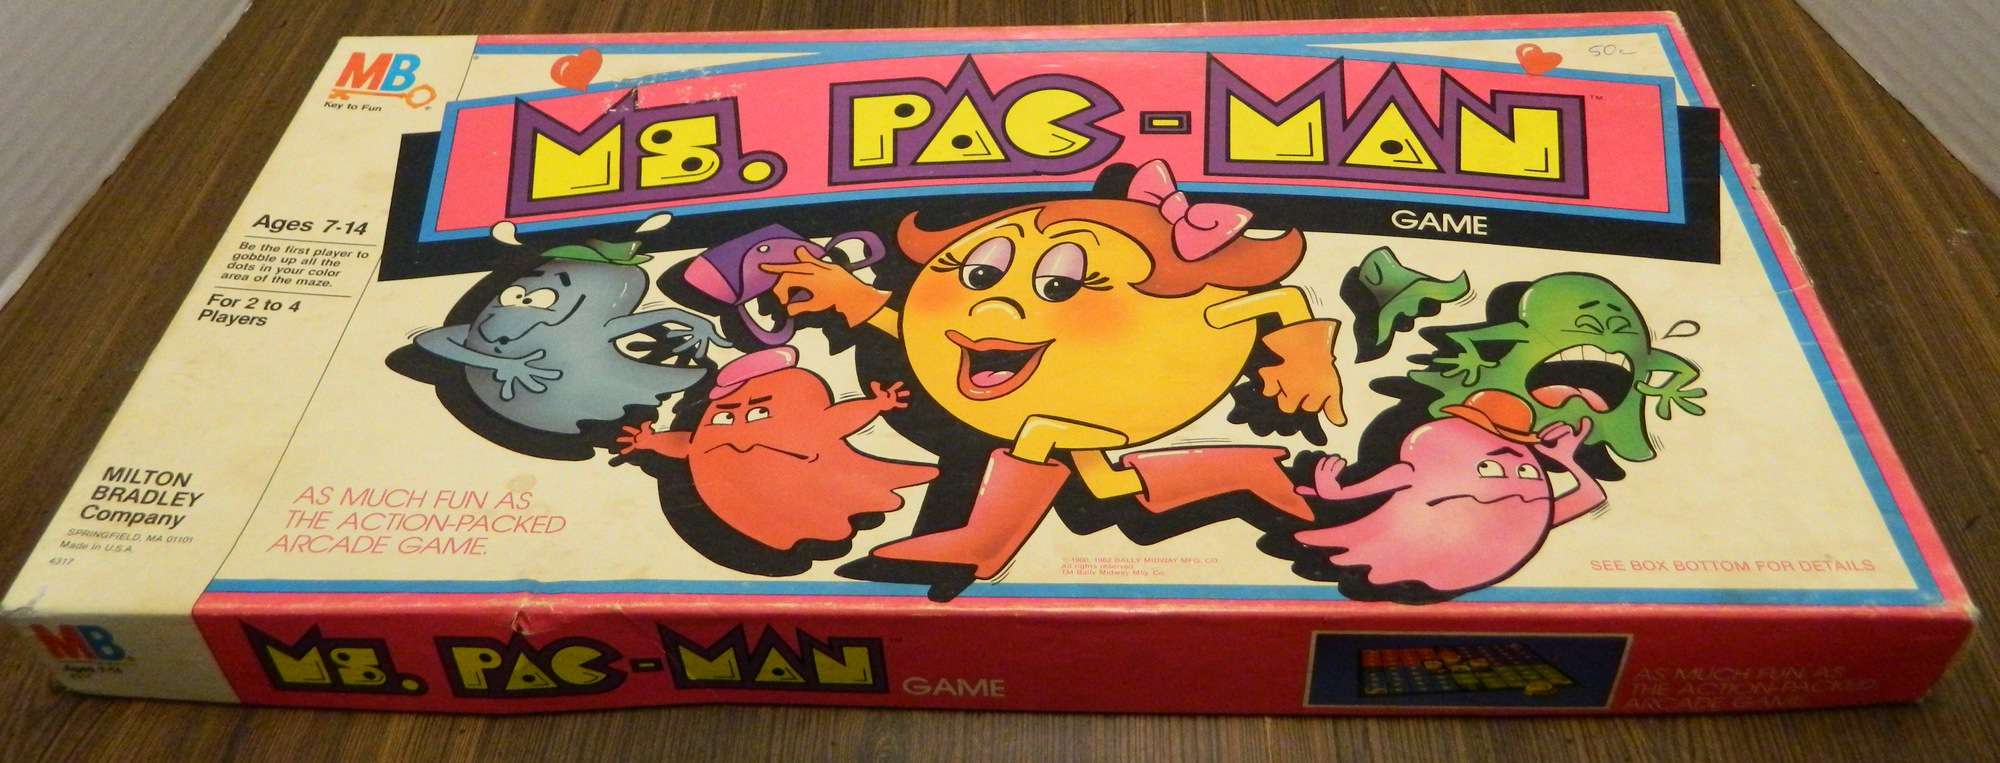 Ms. Pac-Man Board Game Review and Instructions - Geeky Hobbies